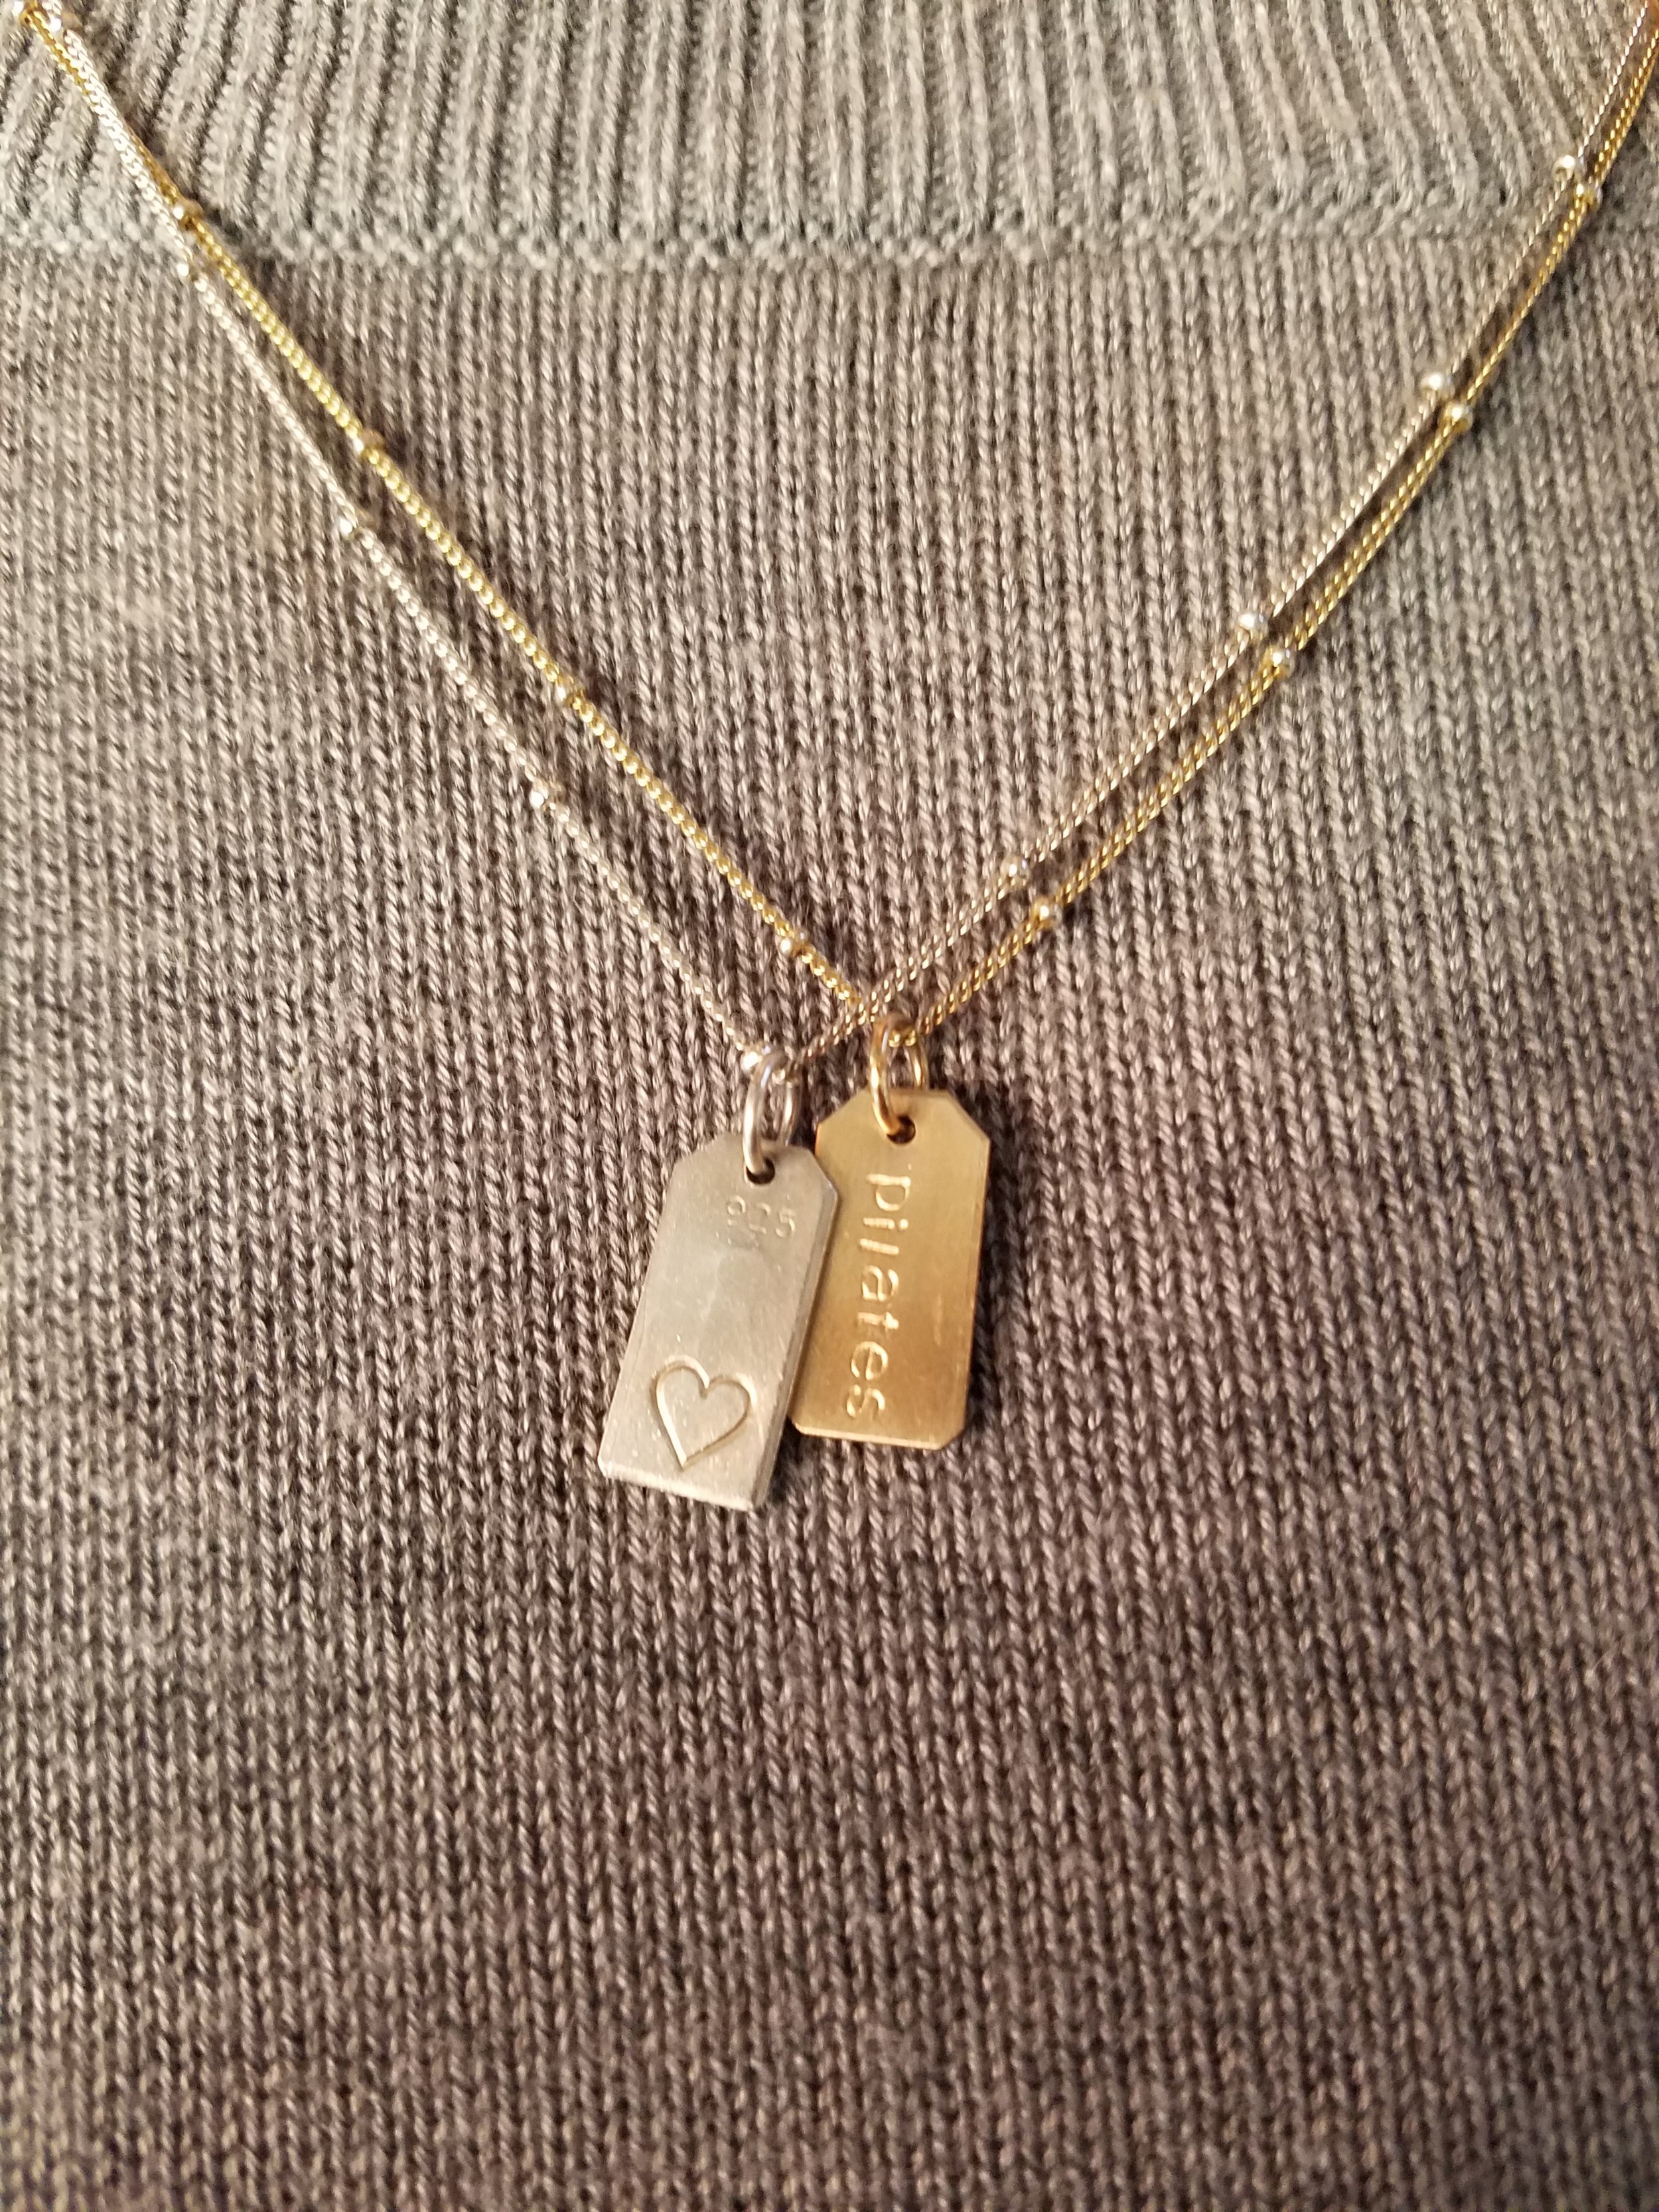 my favorite necklace